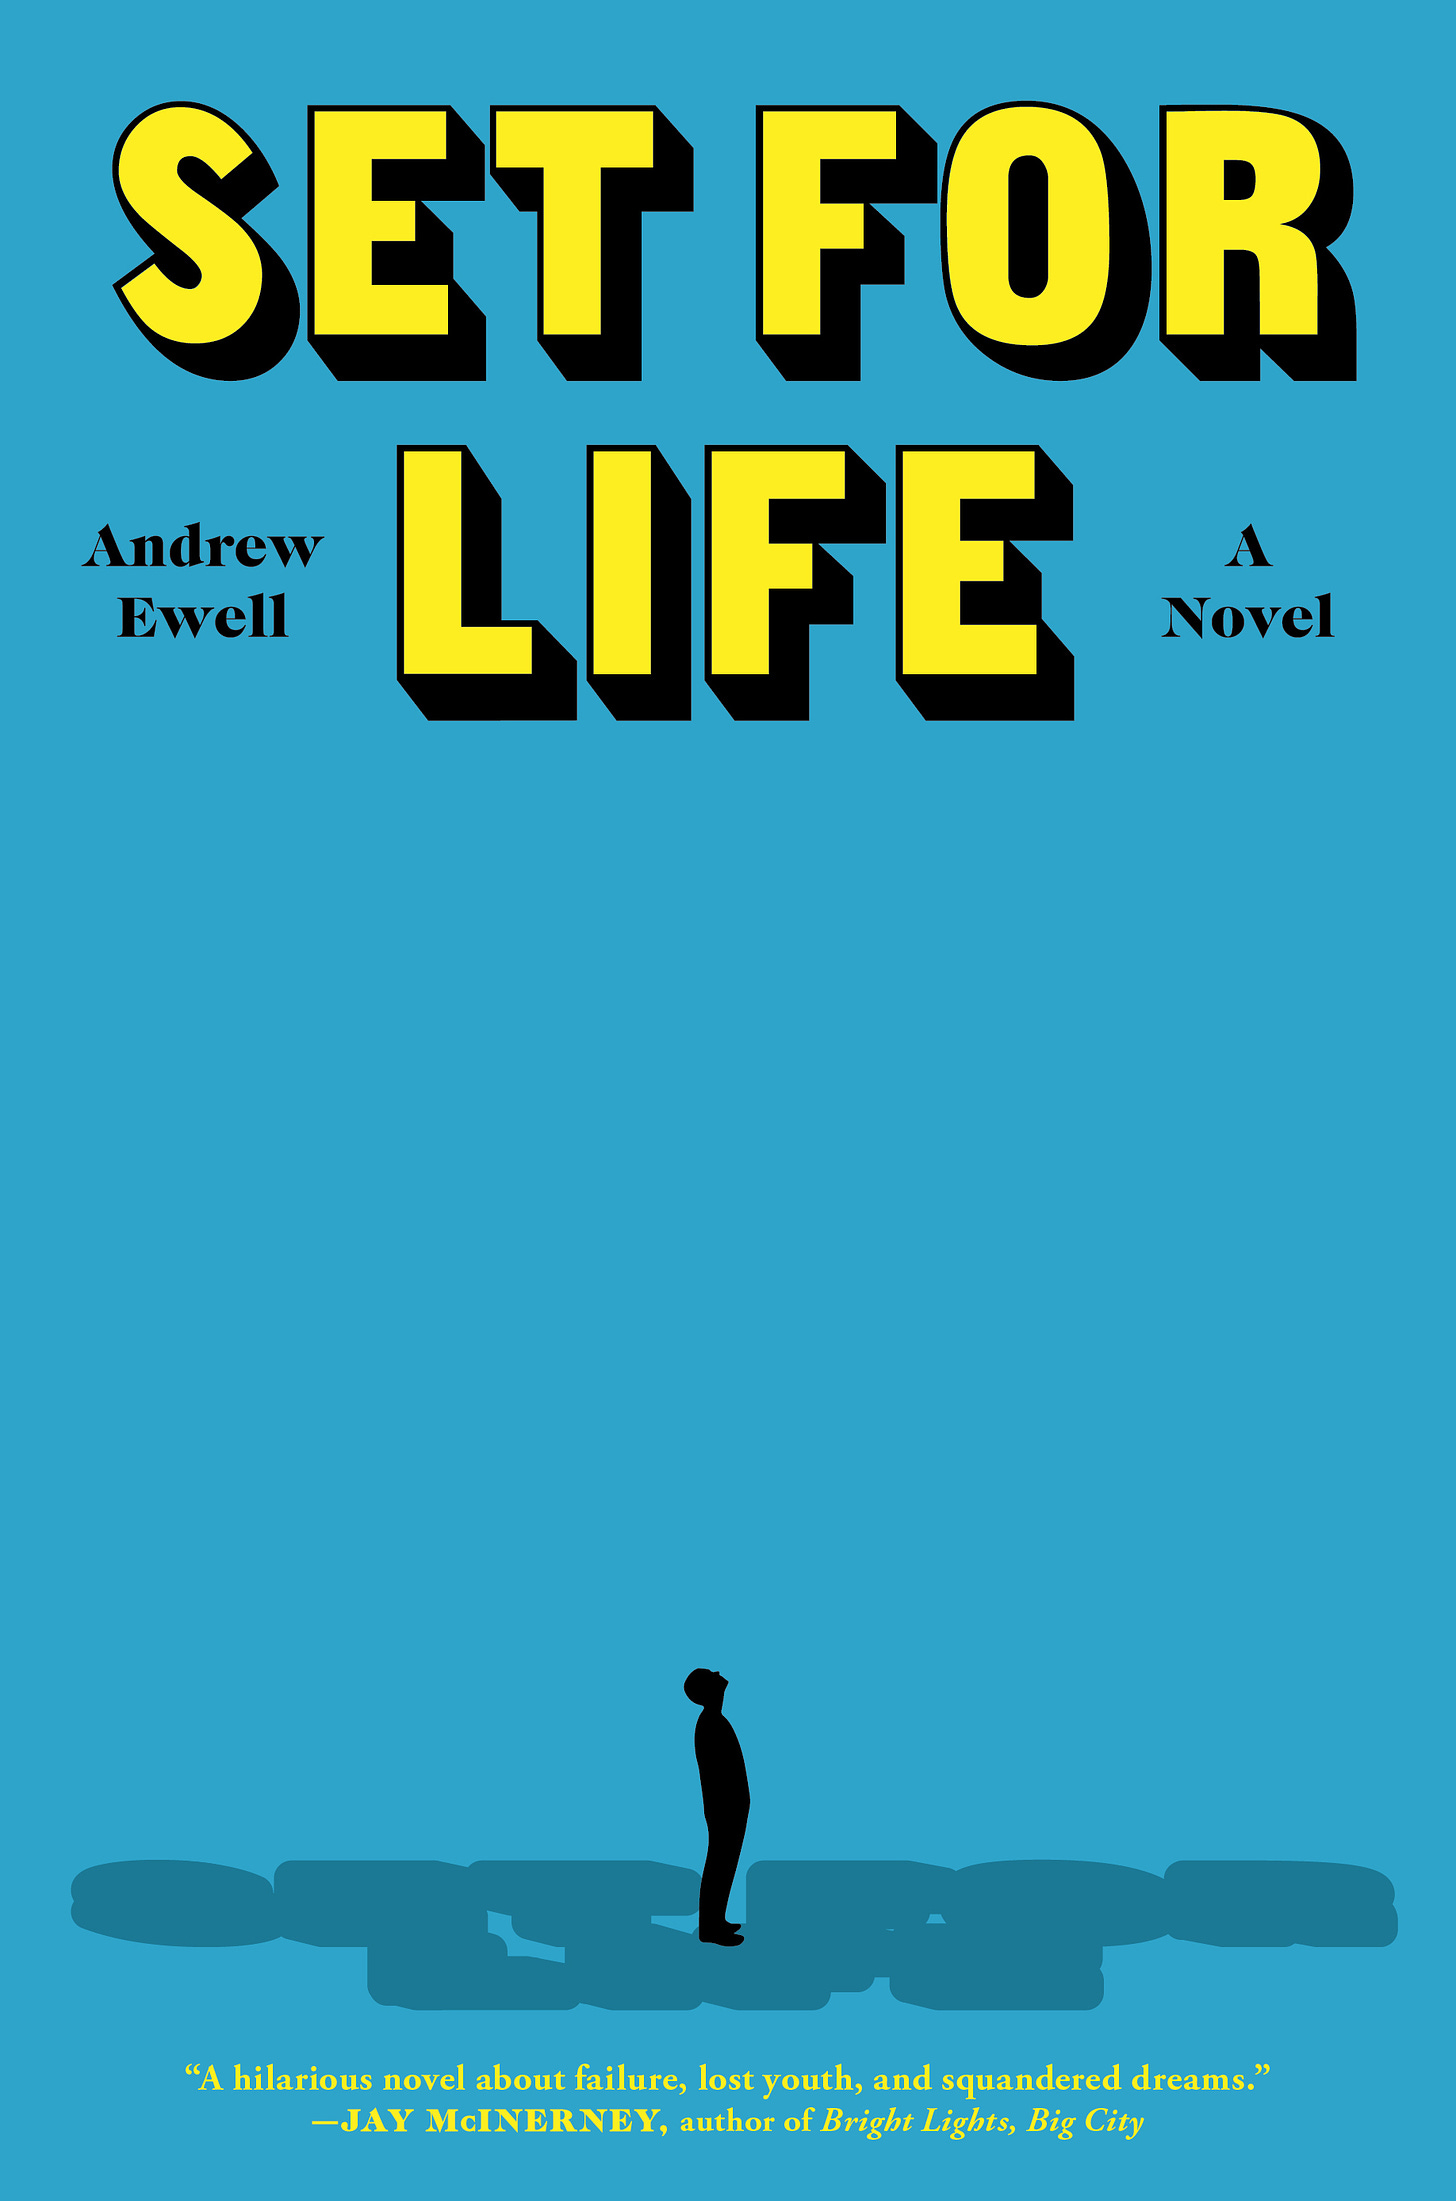 Book cover for Set for Life. A blue book with yellow lettering that says Set for Life: A Novel with a silhoutte of a man looking up at the title while standing in a shadow of the words